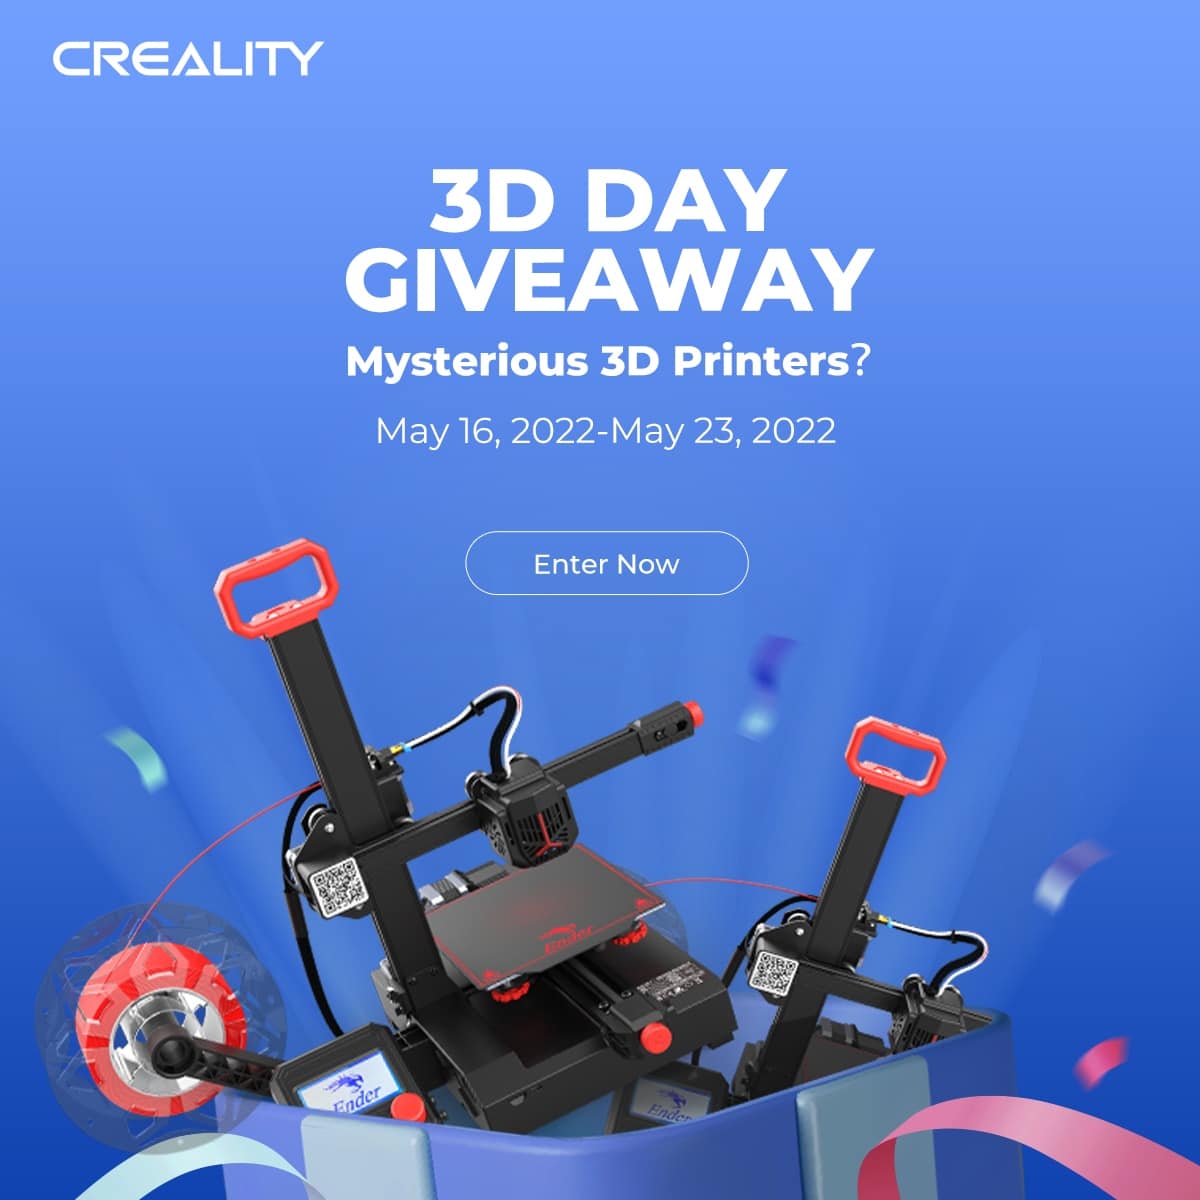 Win Mysterious 3D Printers Giveaway